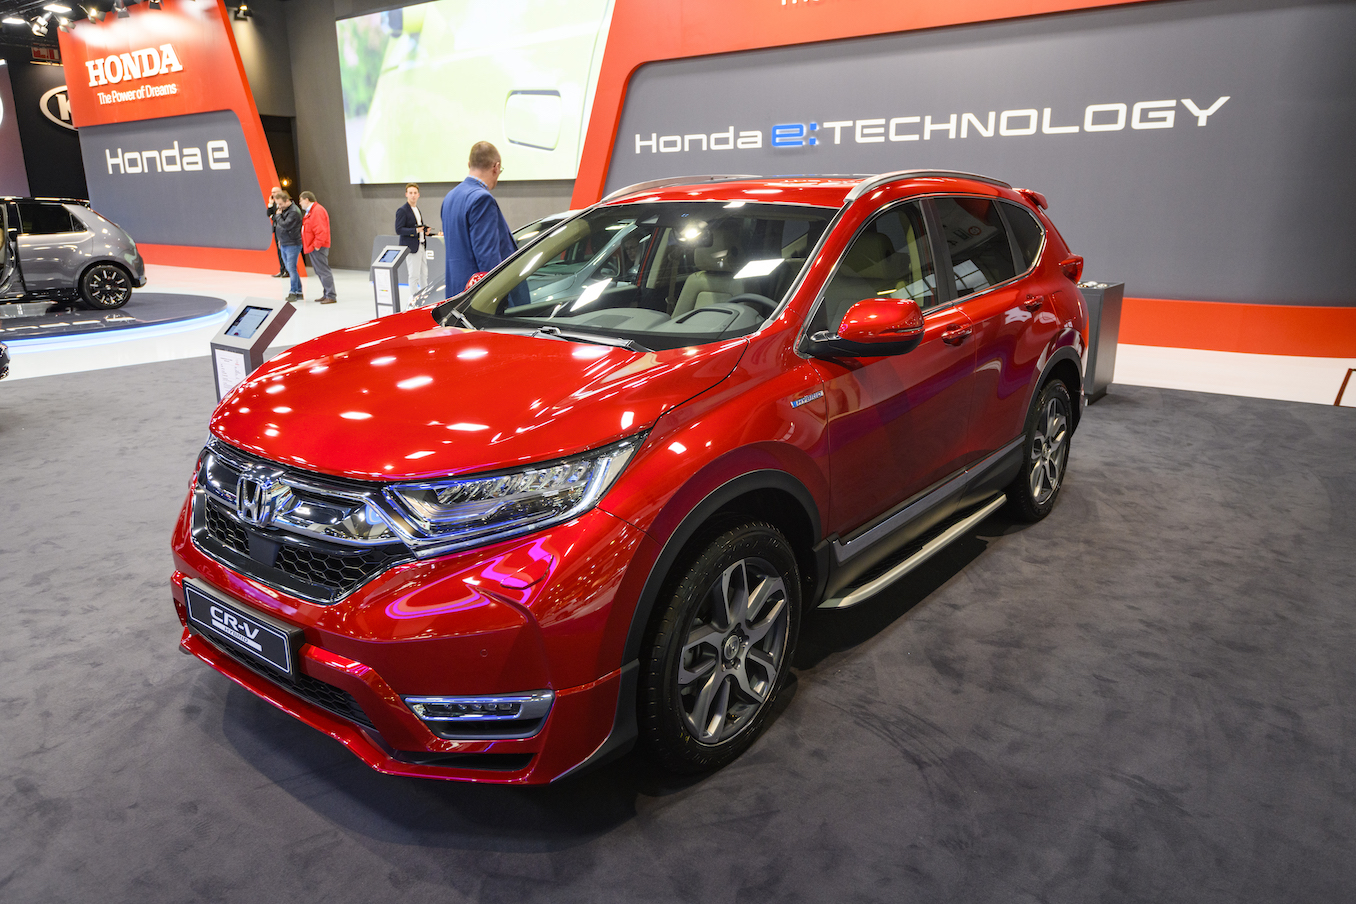 Honda Kept It Simple With the New 2021 CR-V